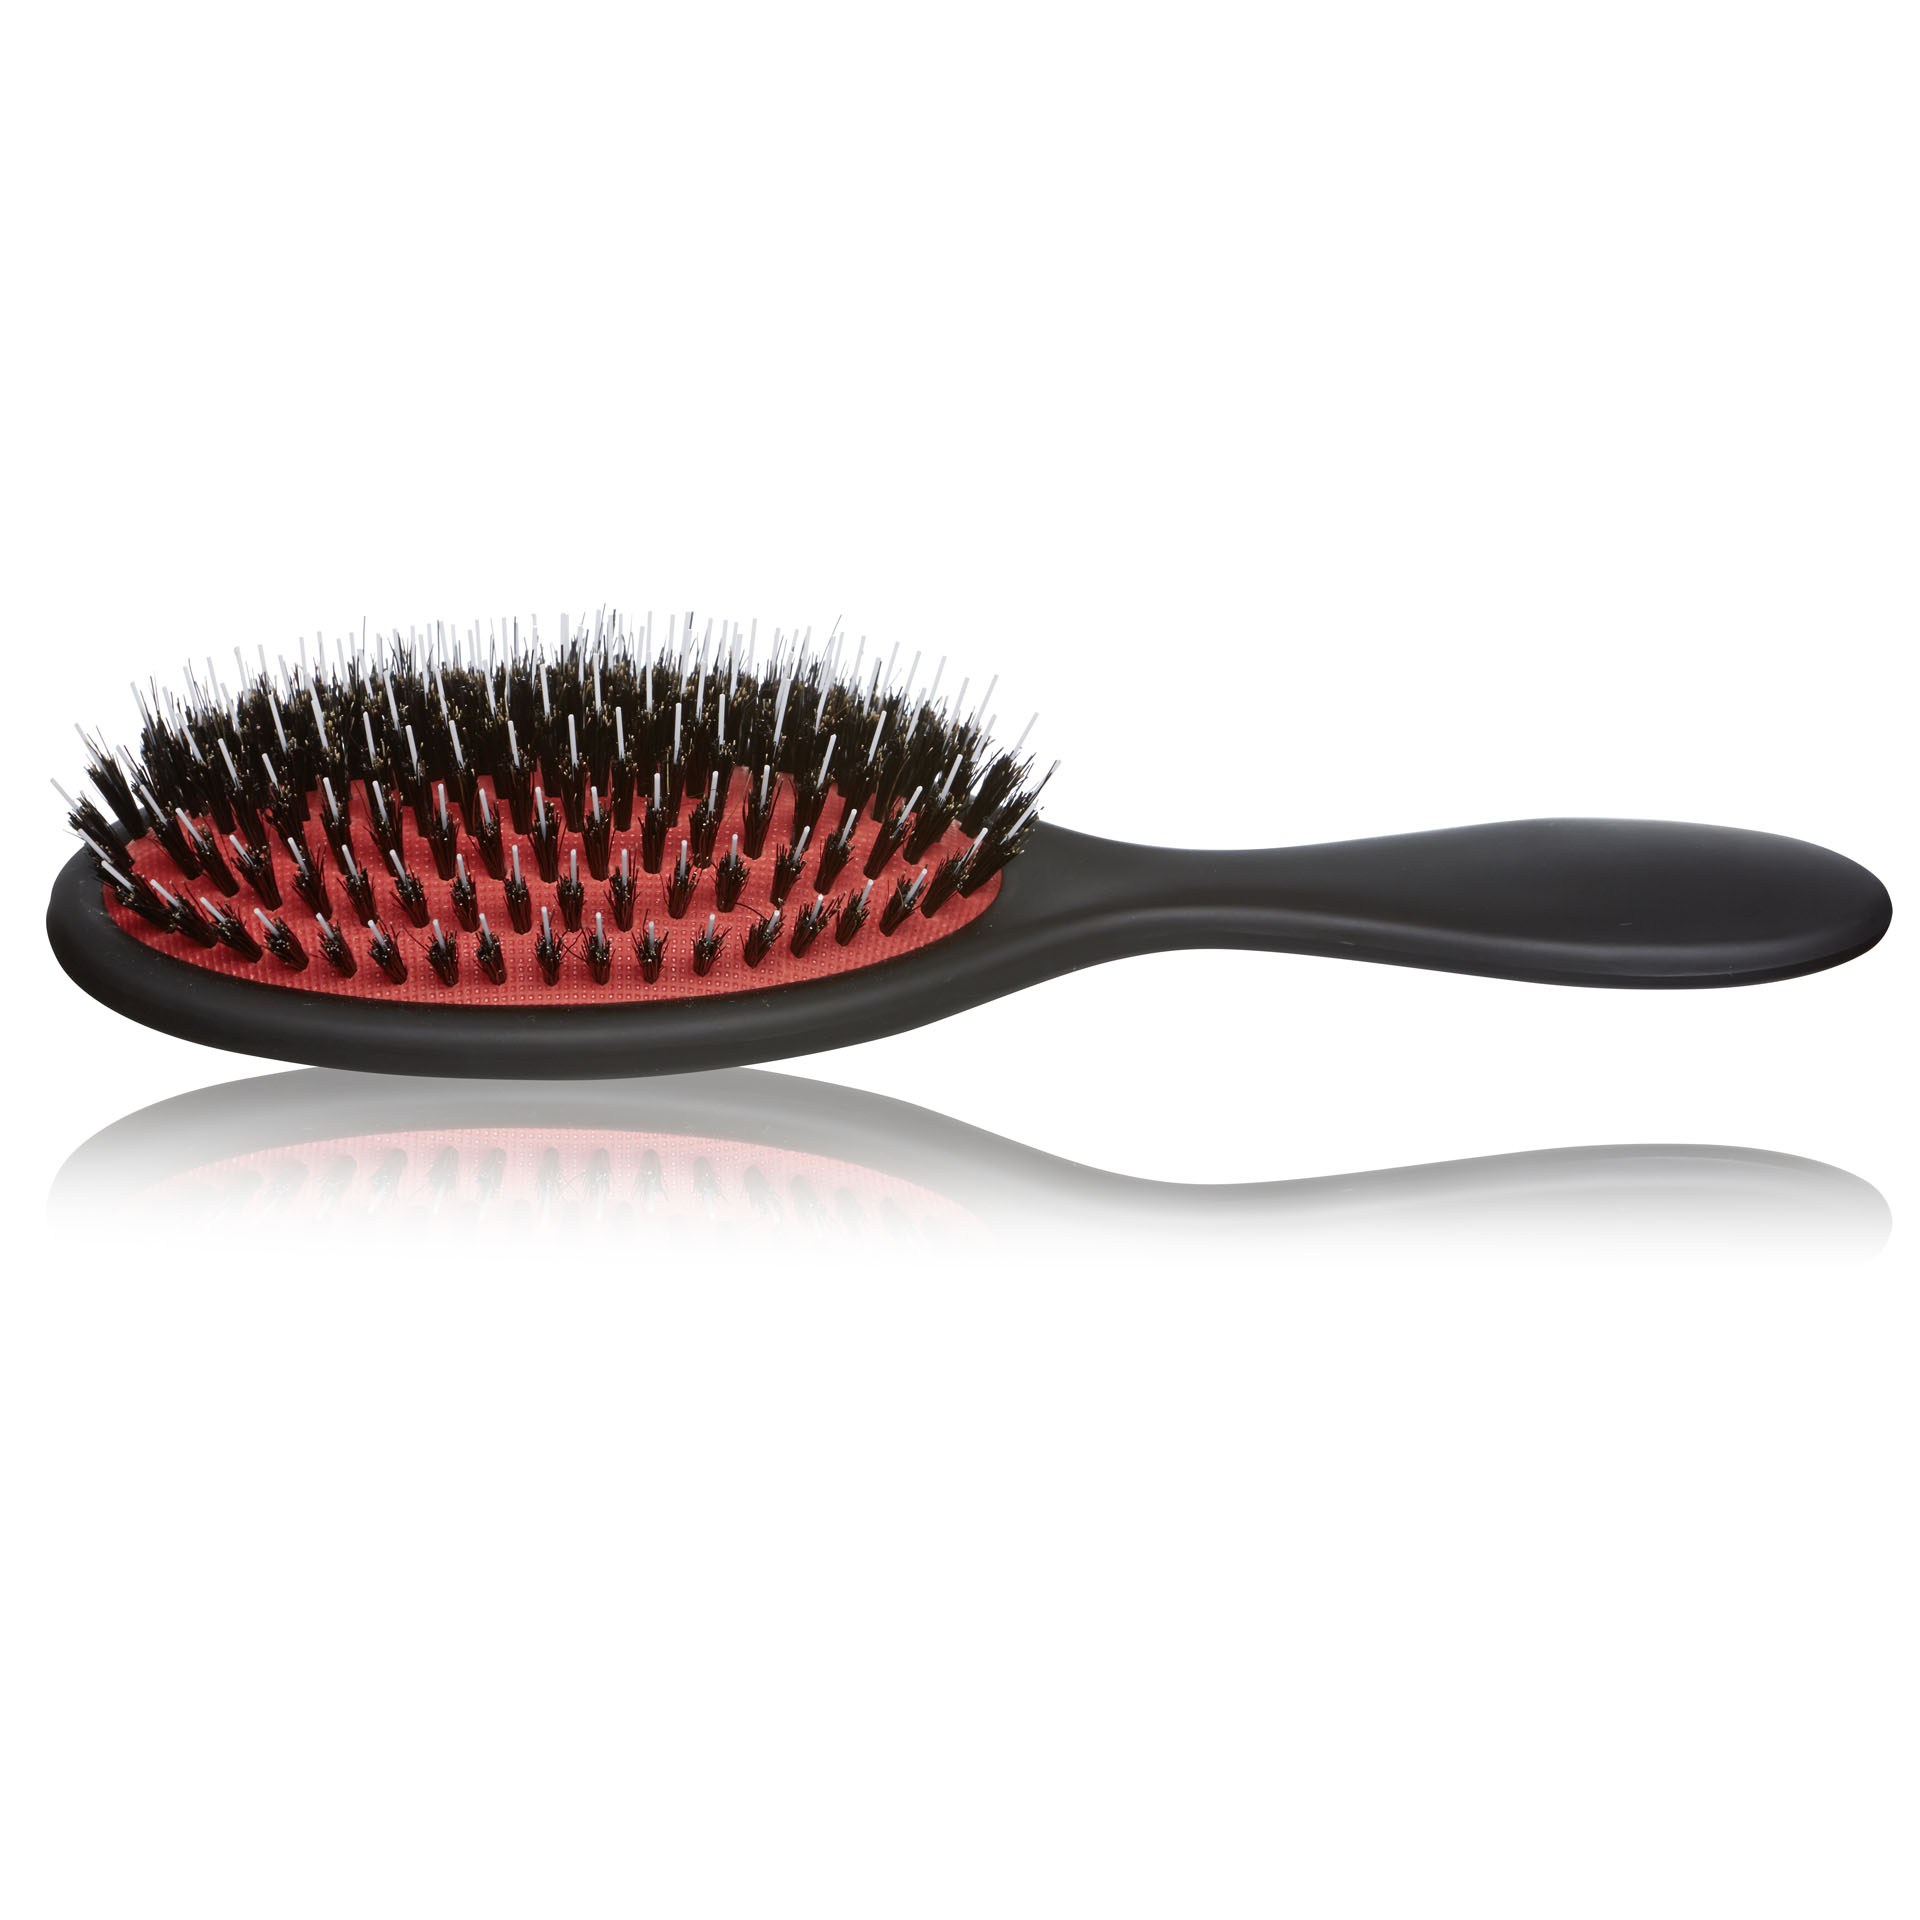 Kansai hairbrush perfectly suitable for hair extensions